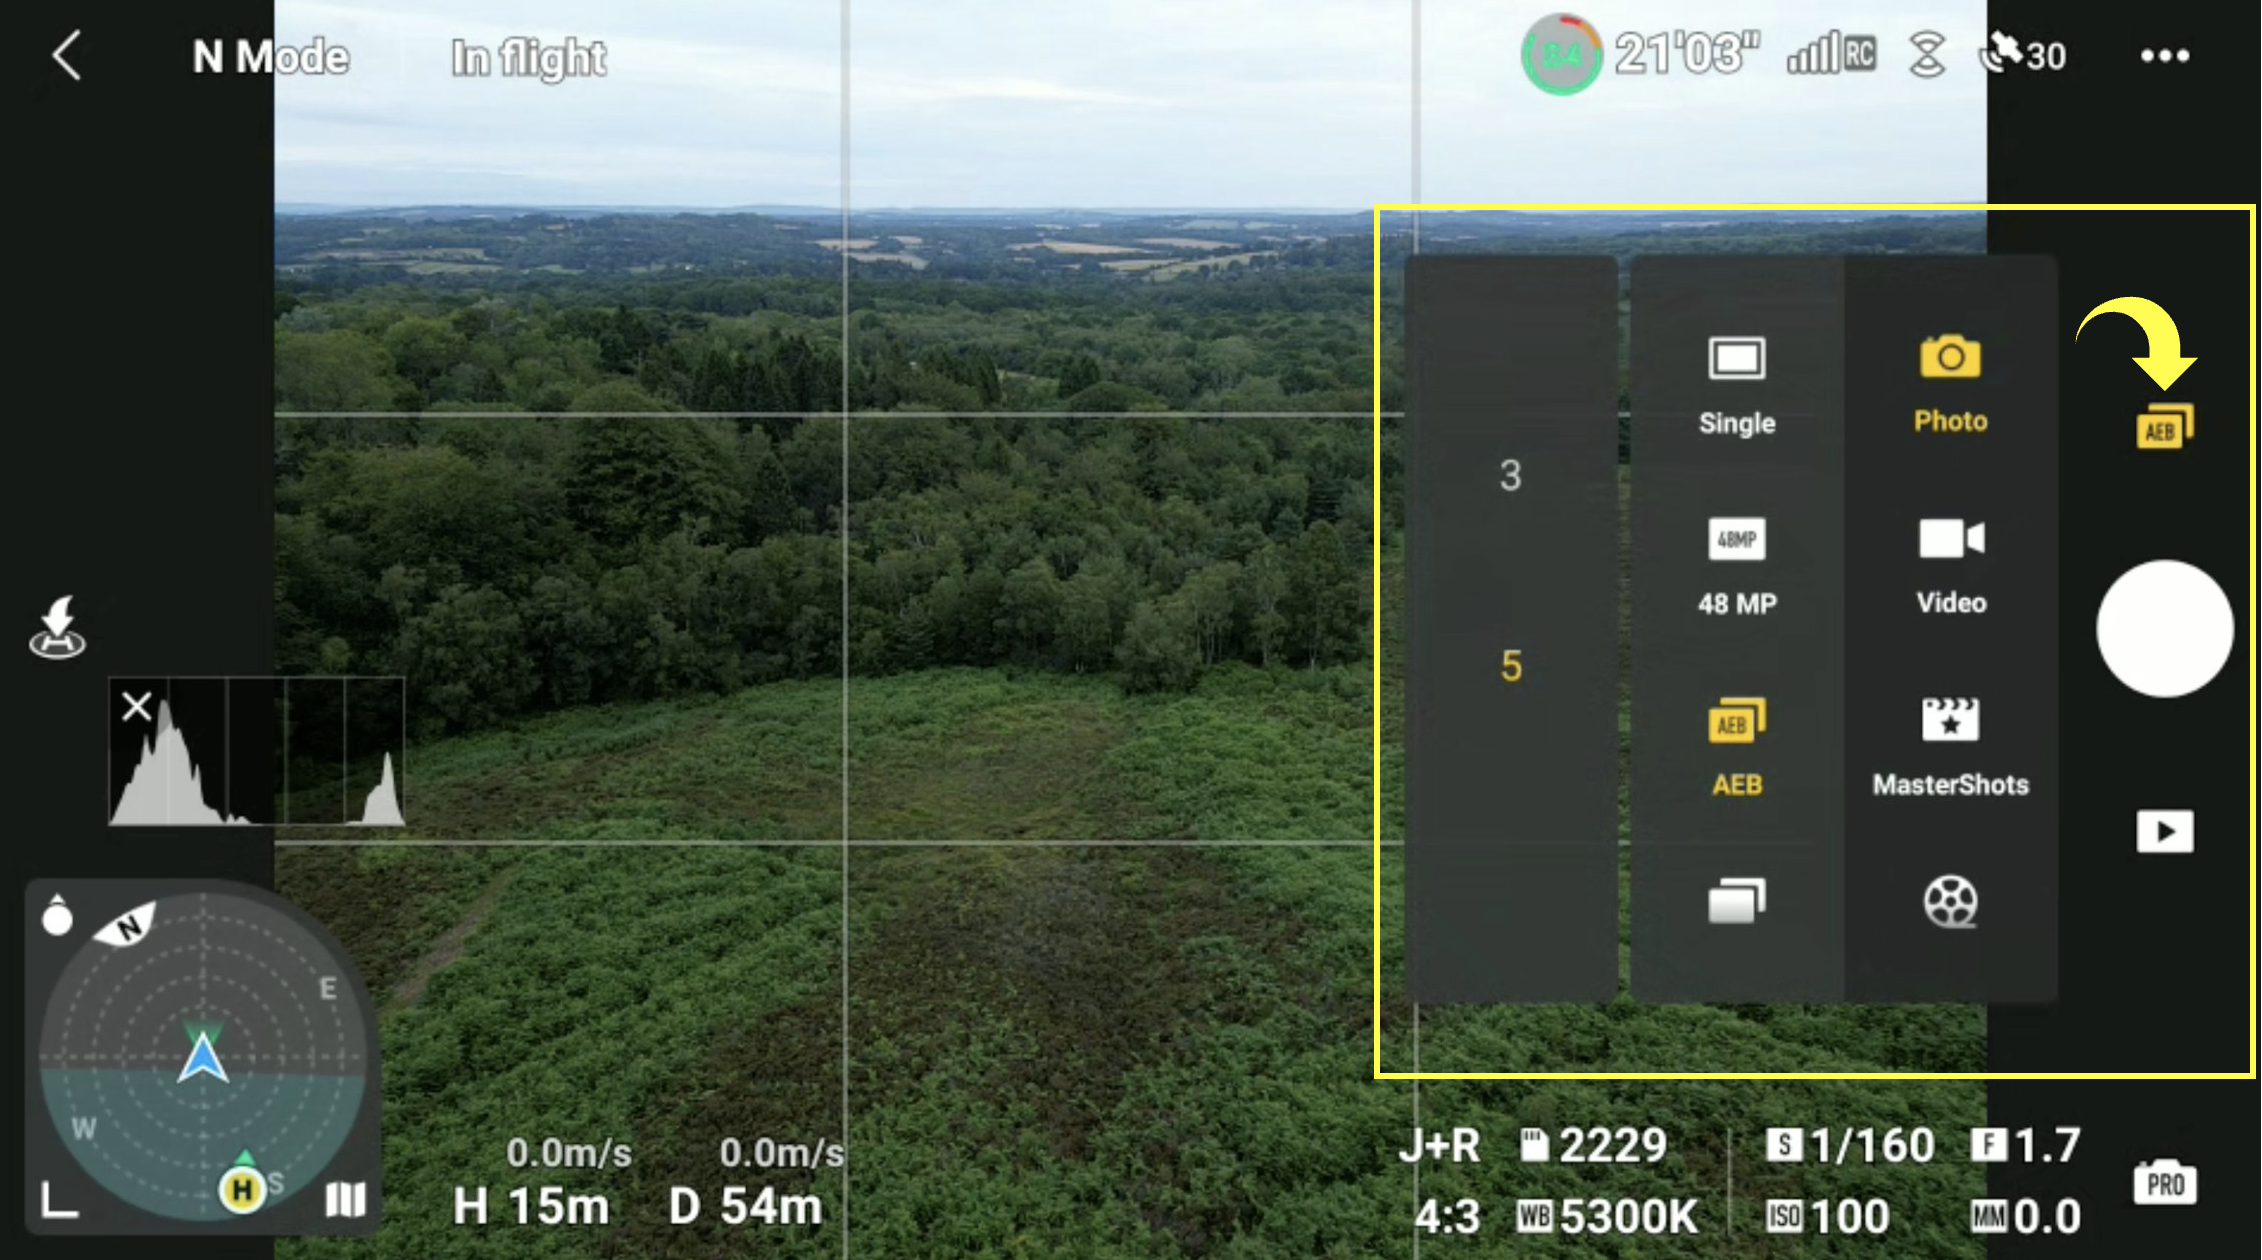 DJI Mini 3 Pro Features (Explained for Beginners) – Droneblog